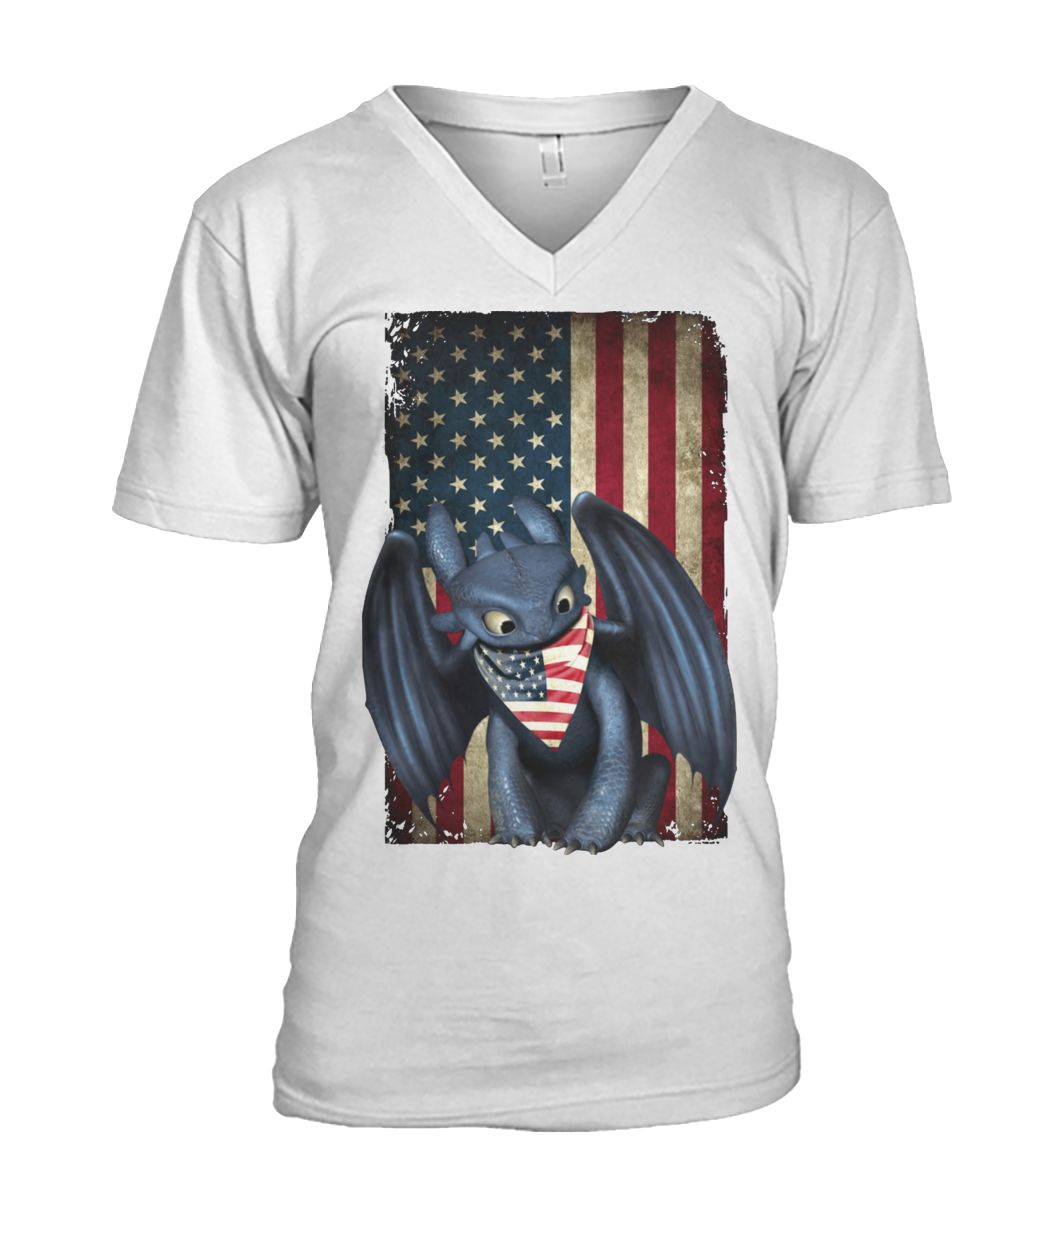 Toothless american flag 4th of july mens v-neck